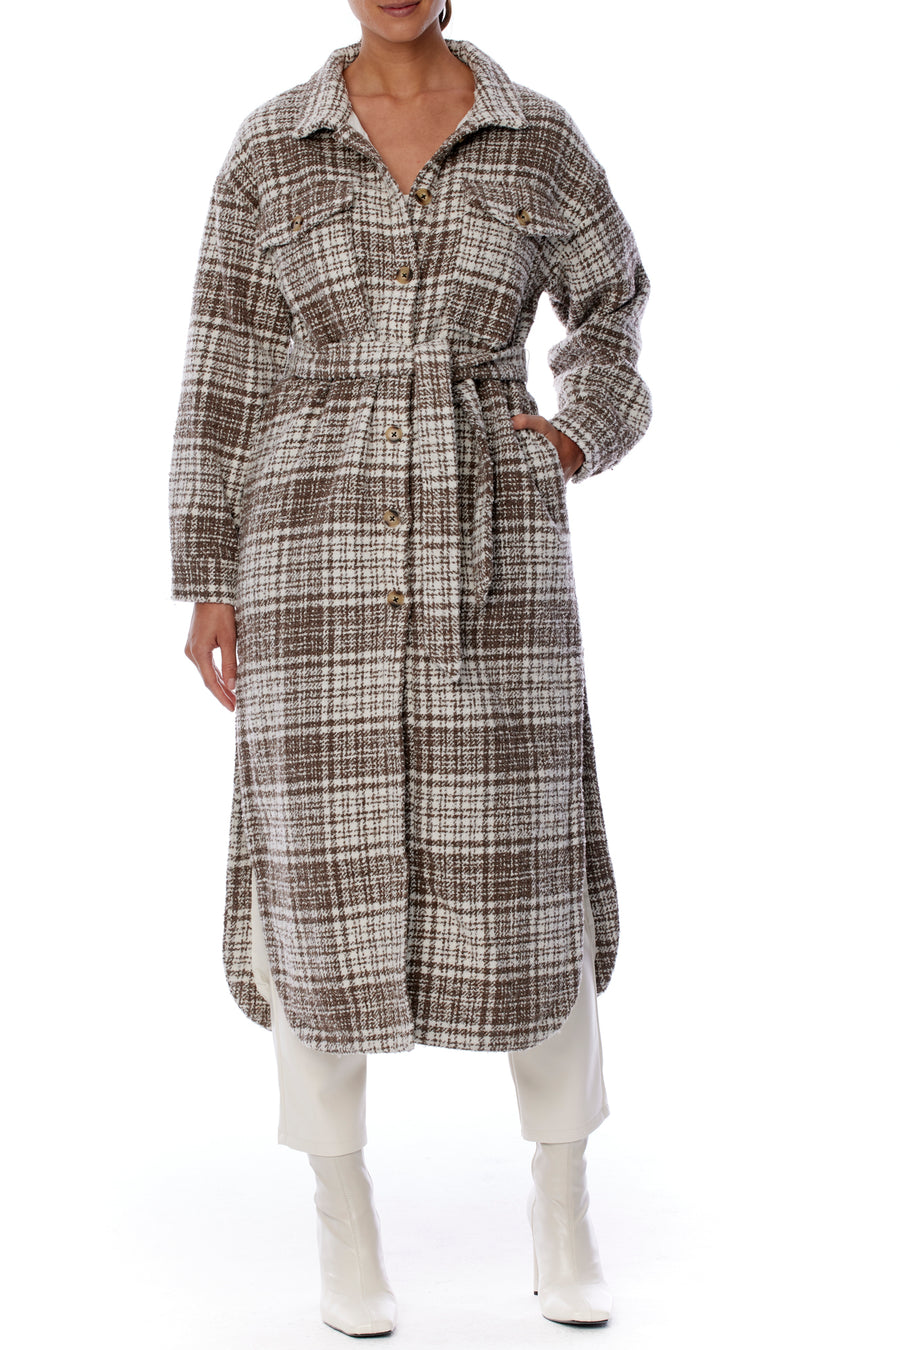 midi length, button up coco and white plaid jacket with shirttail hem and waist tie